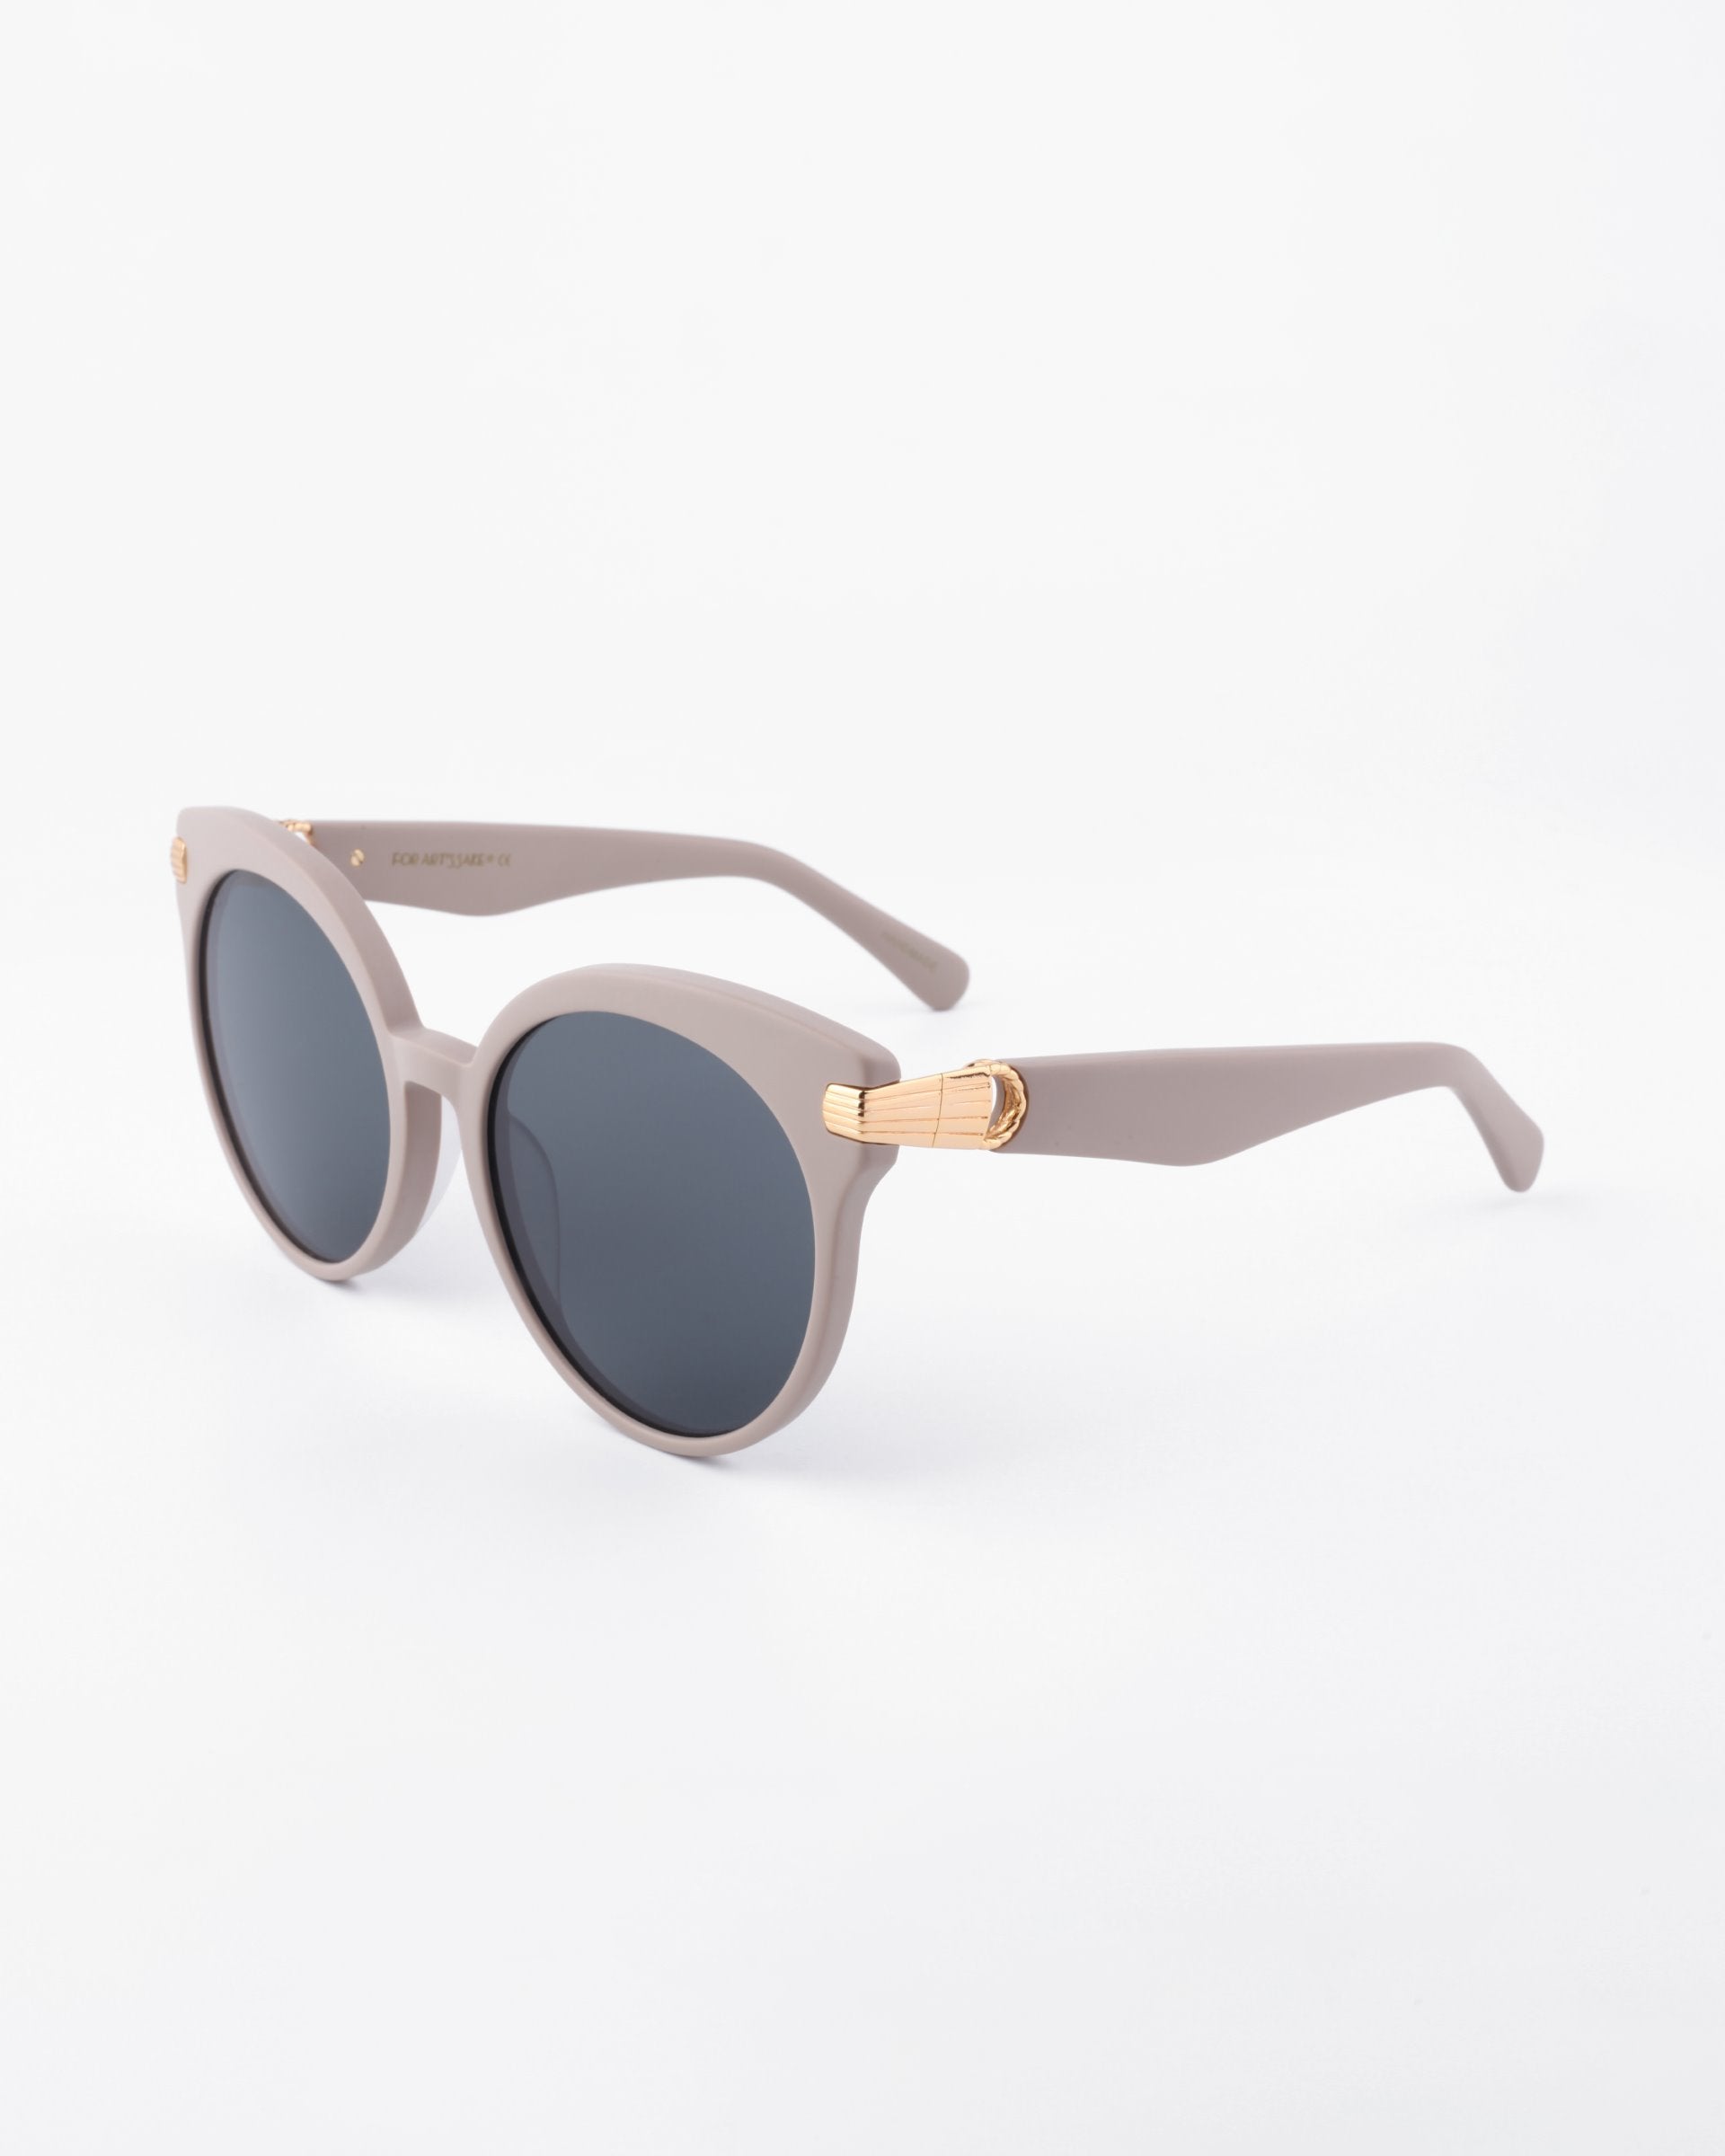 A pair of stylish round For Art's Sake® Muse sunglasses with light grey frames and shatter-resistant nylon lenses. The arms feature 18-karat gold-plated accents near the hinges. Handmade from plant-based acetate, these sunglasses are placed against a plain white background.